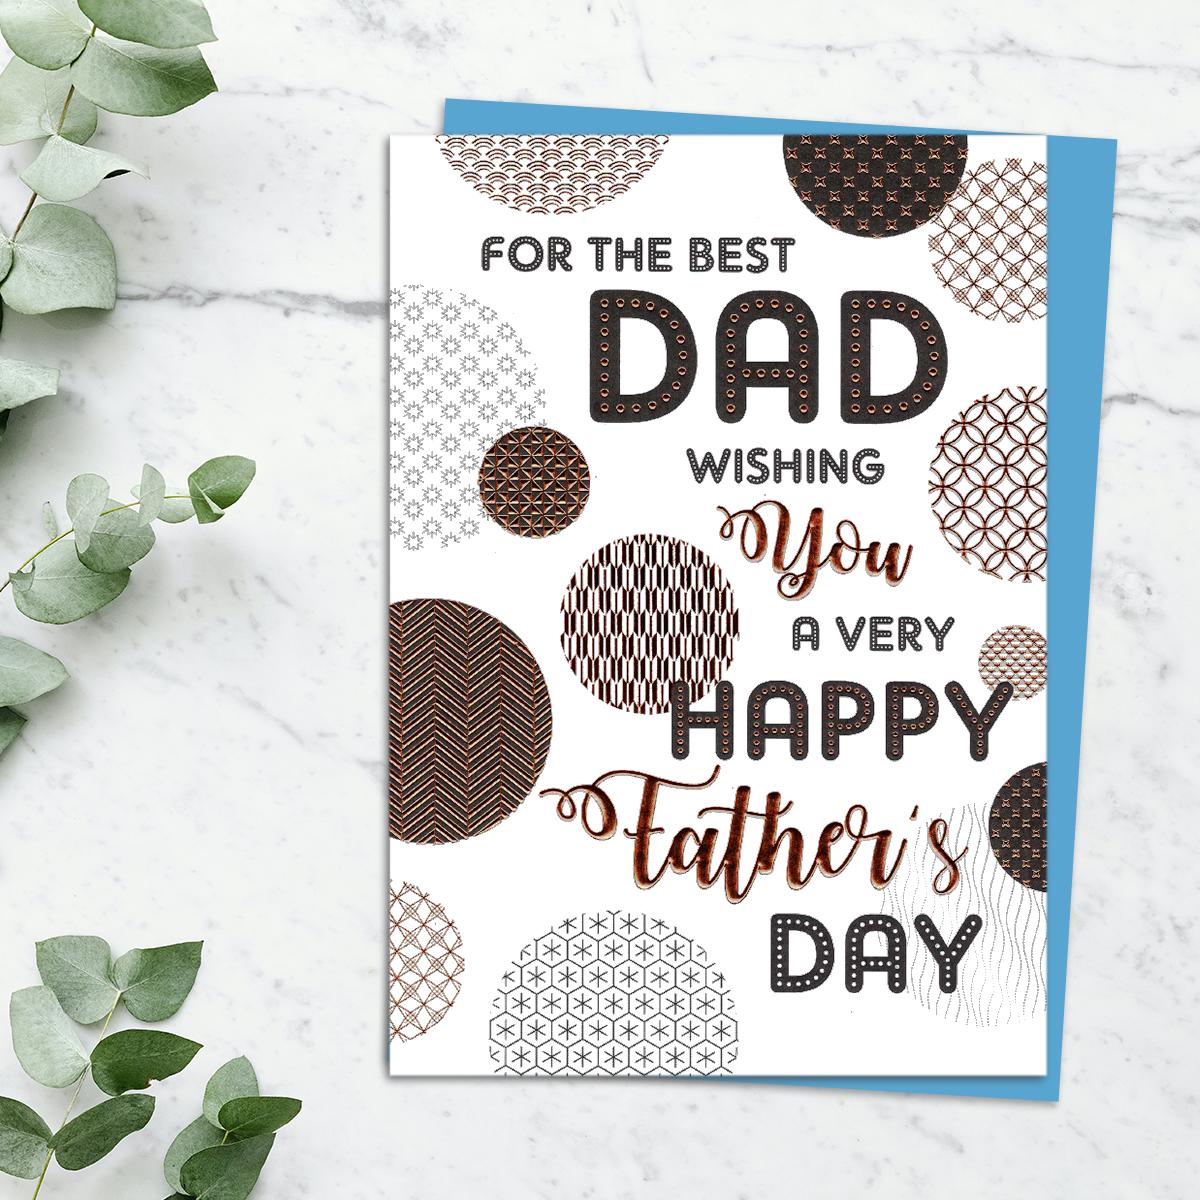 'For The Best Dad Wishing You A Very Happy Father's Day' Card Featuring An Abstract Contemporary Geometric Circle Design. With Added Copper Foil Detail And Blue Envelope